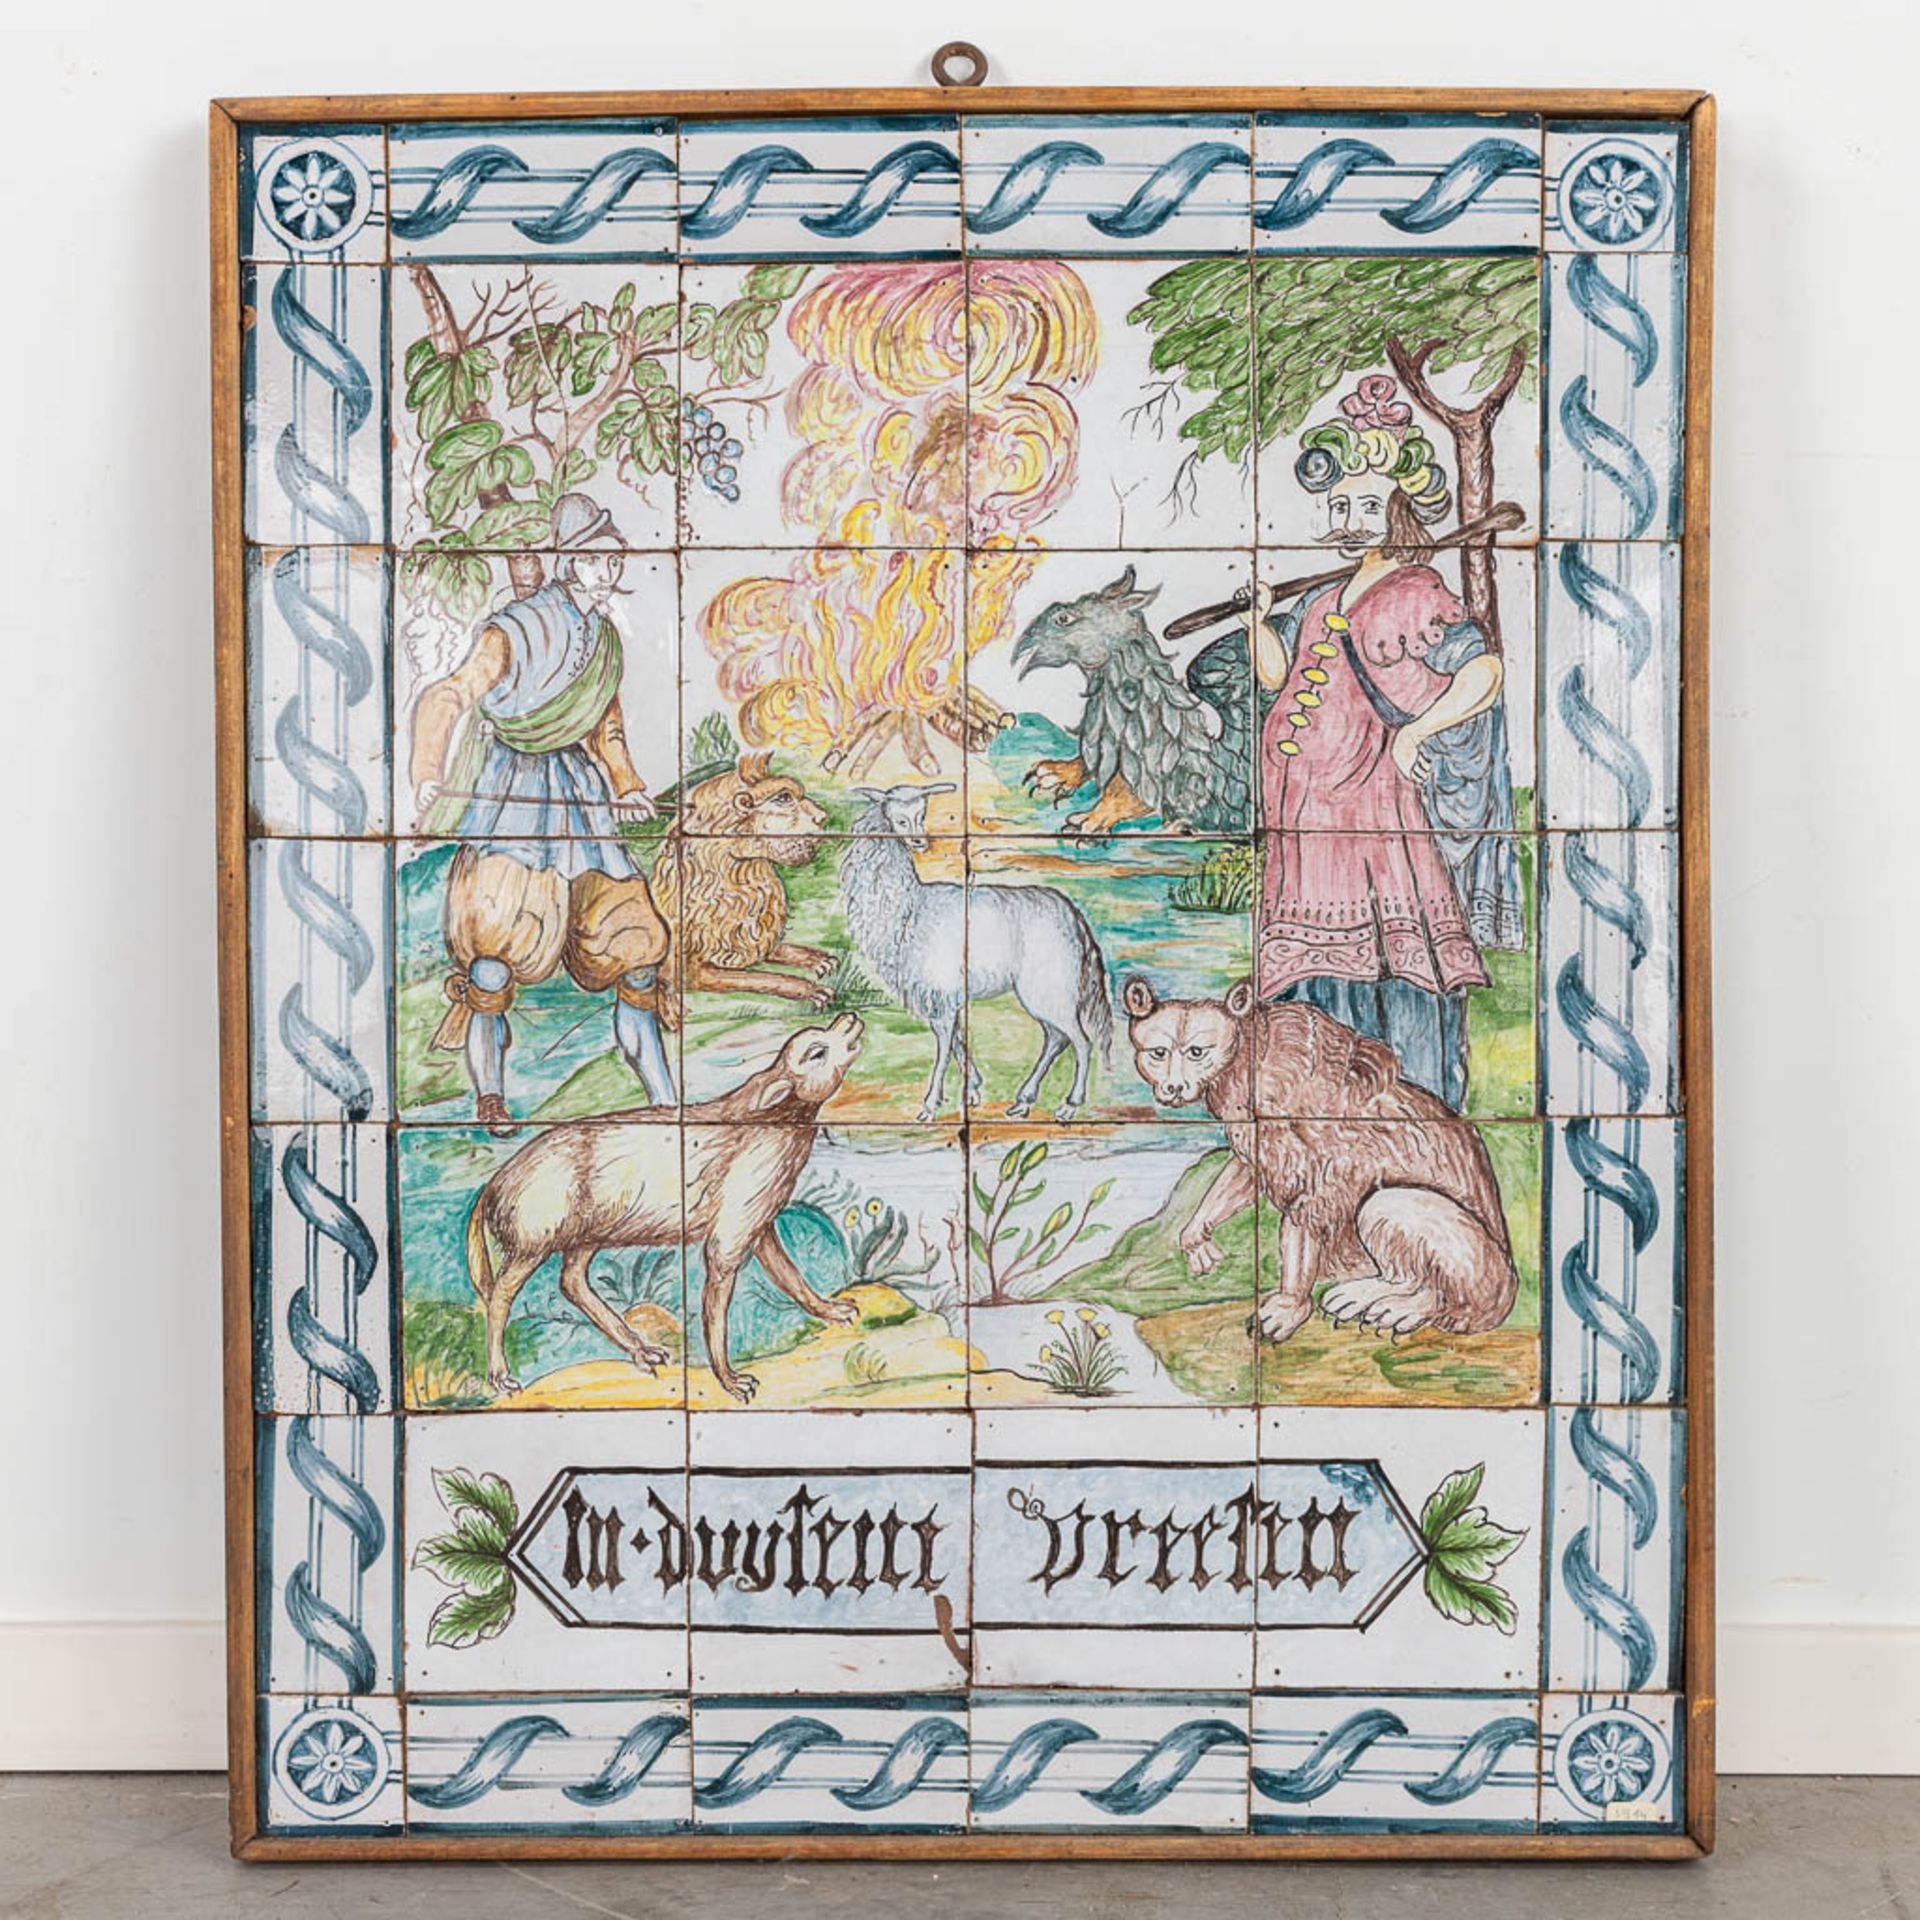 J. Aalmins, Rotterdam, An antique tile painting, polychrome tiles decor of animals and figurines. 19 - Image 3 of 7